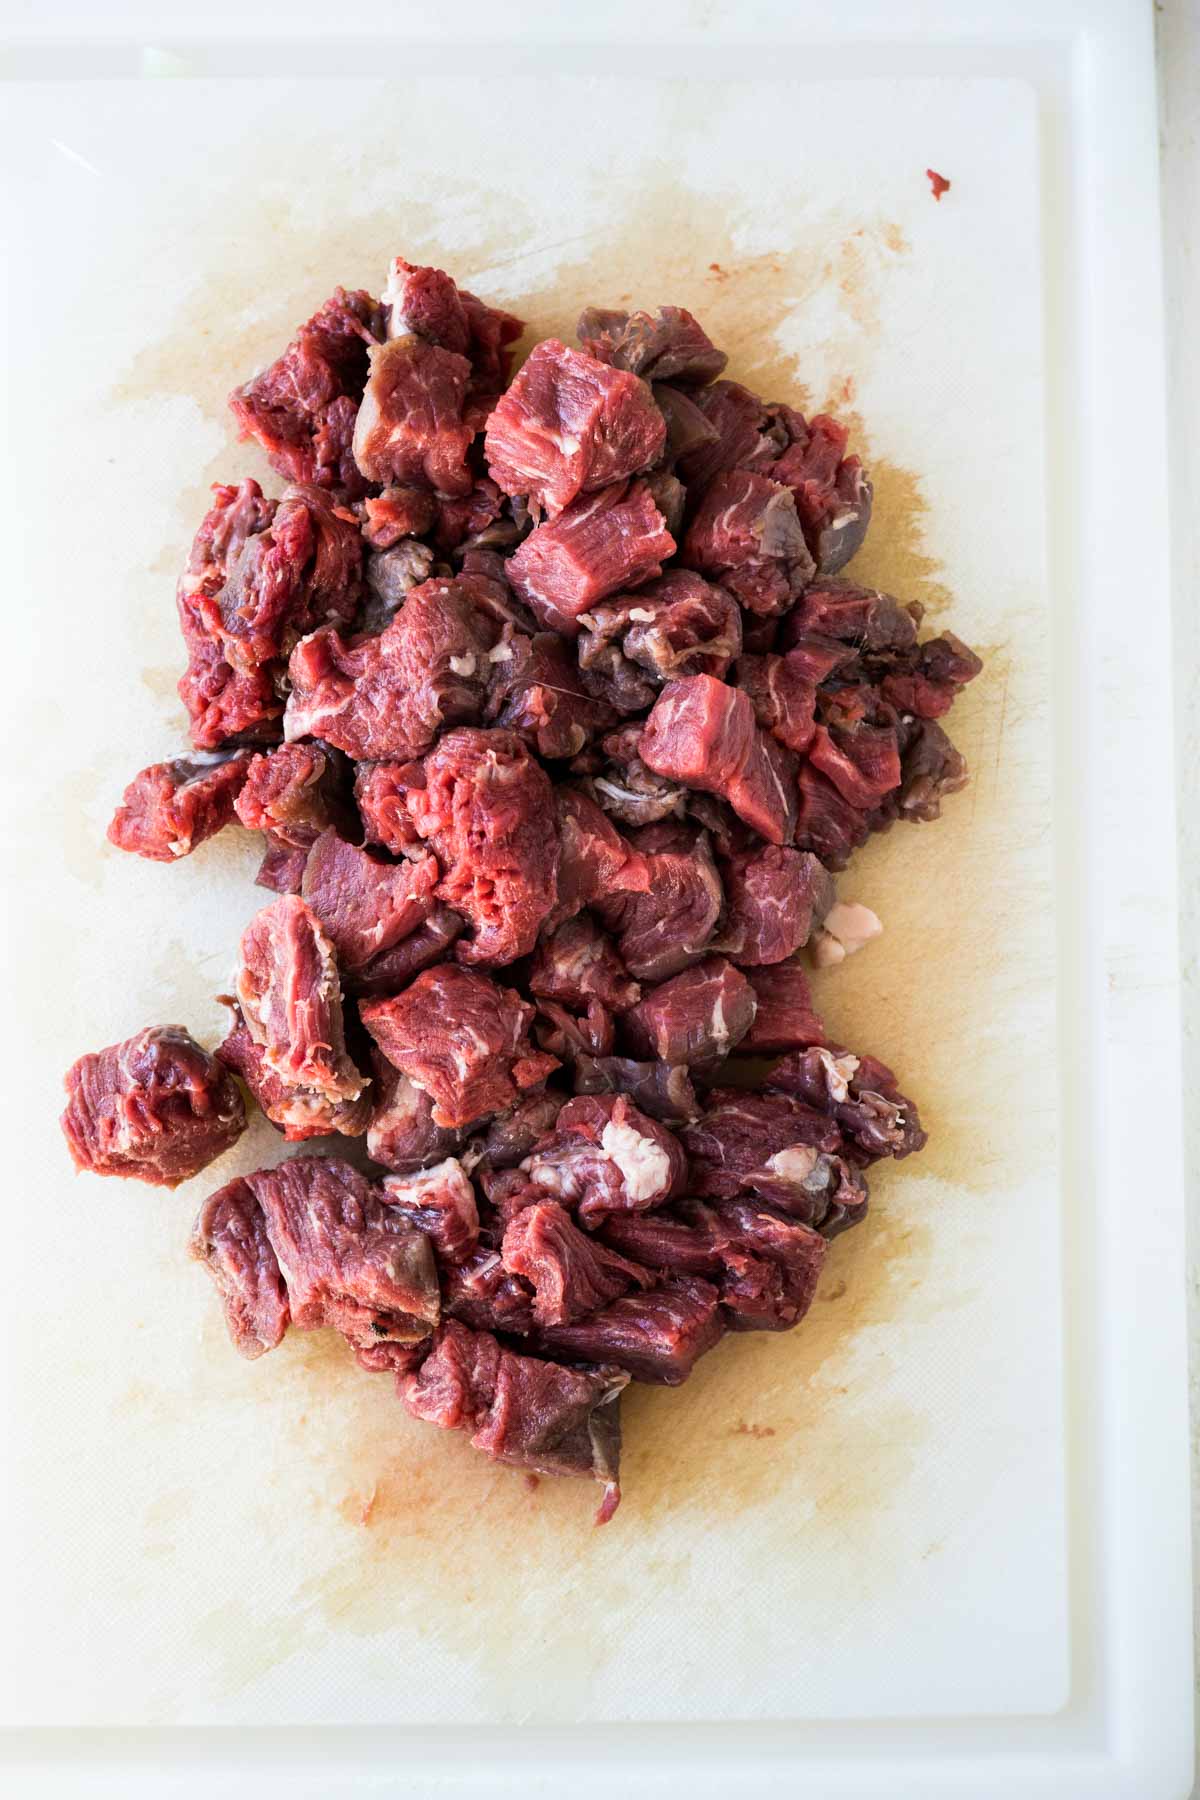 Pieces of raw tenderloin tips on a cutting board.